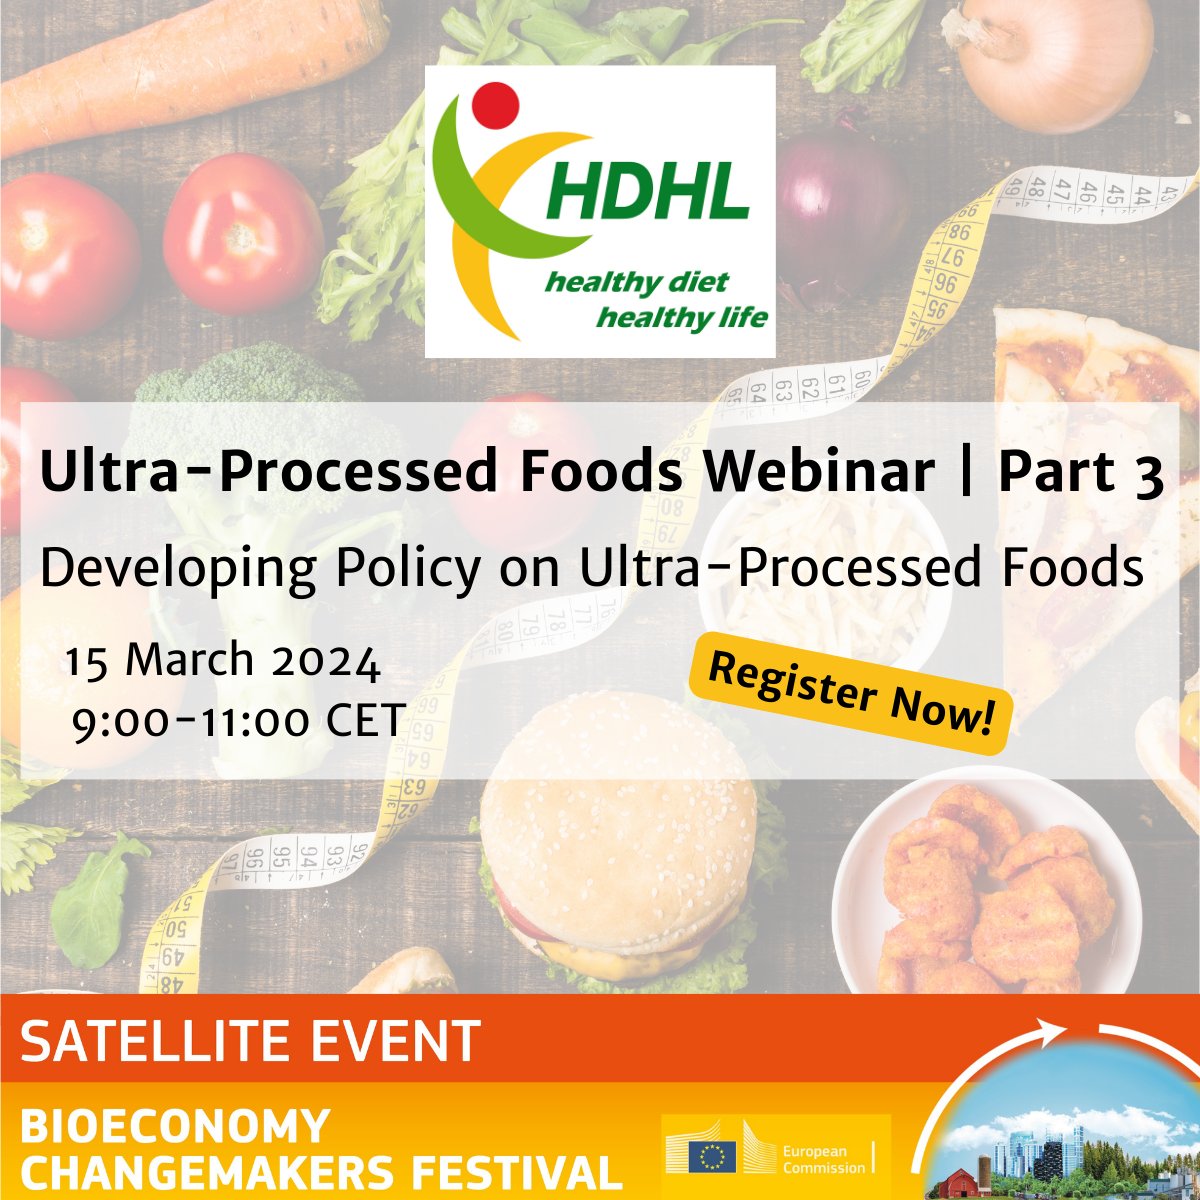 Join the European Healthy Diet for a Healthy Life (HDHL) initiative's satellite event, part of the Bioeconomy Changemakers Festival. Engage in dialogue on food production and combating ultra-processed foods. zonmw.zoom.us/webinar/regist… #BioeconomyChangemakers #FoodForThought 🥦🍎